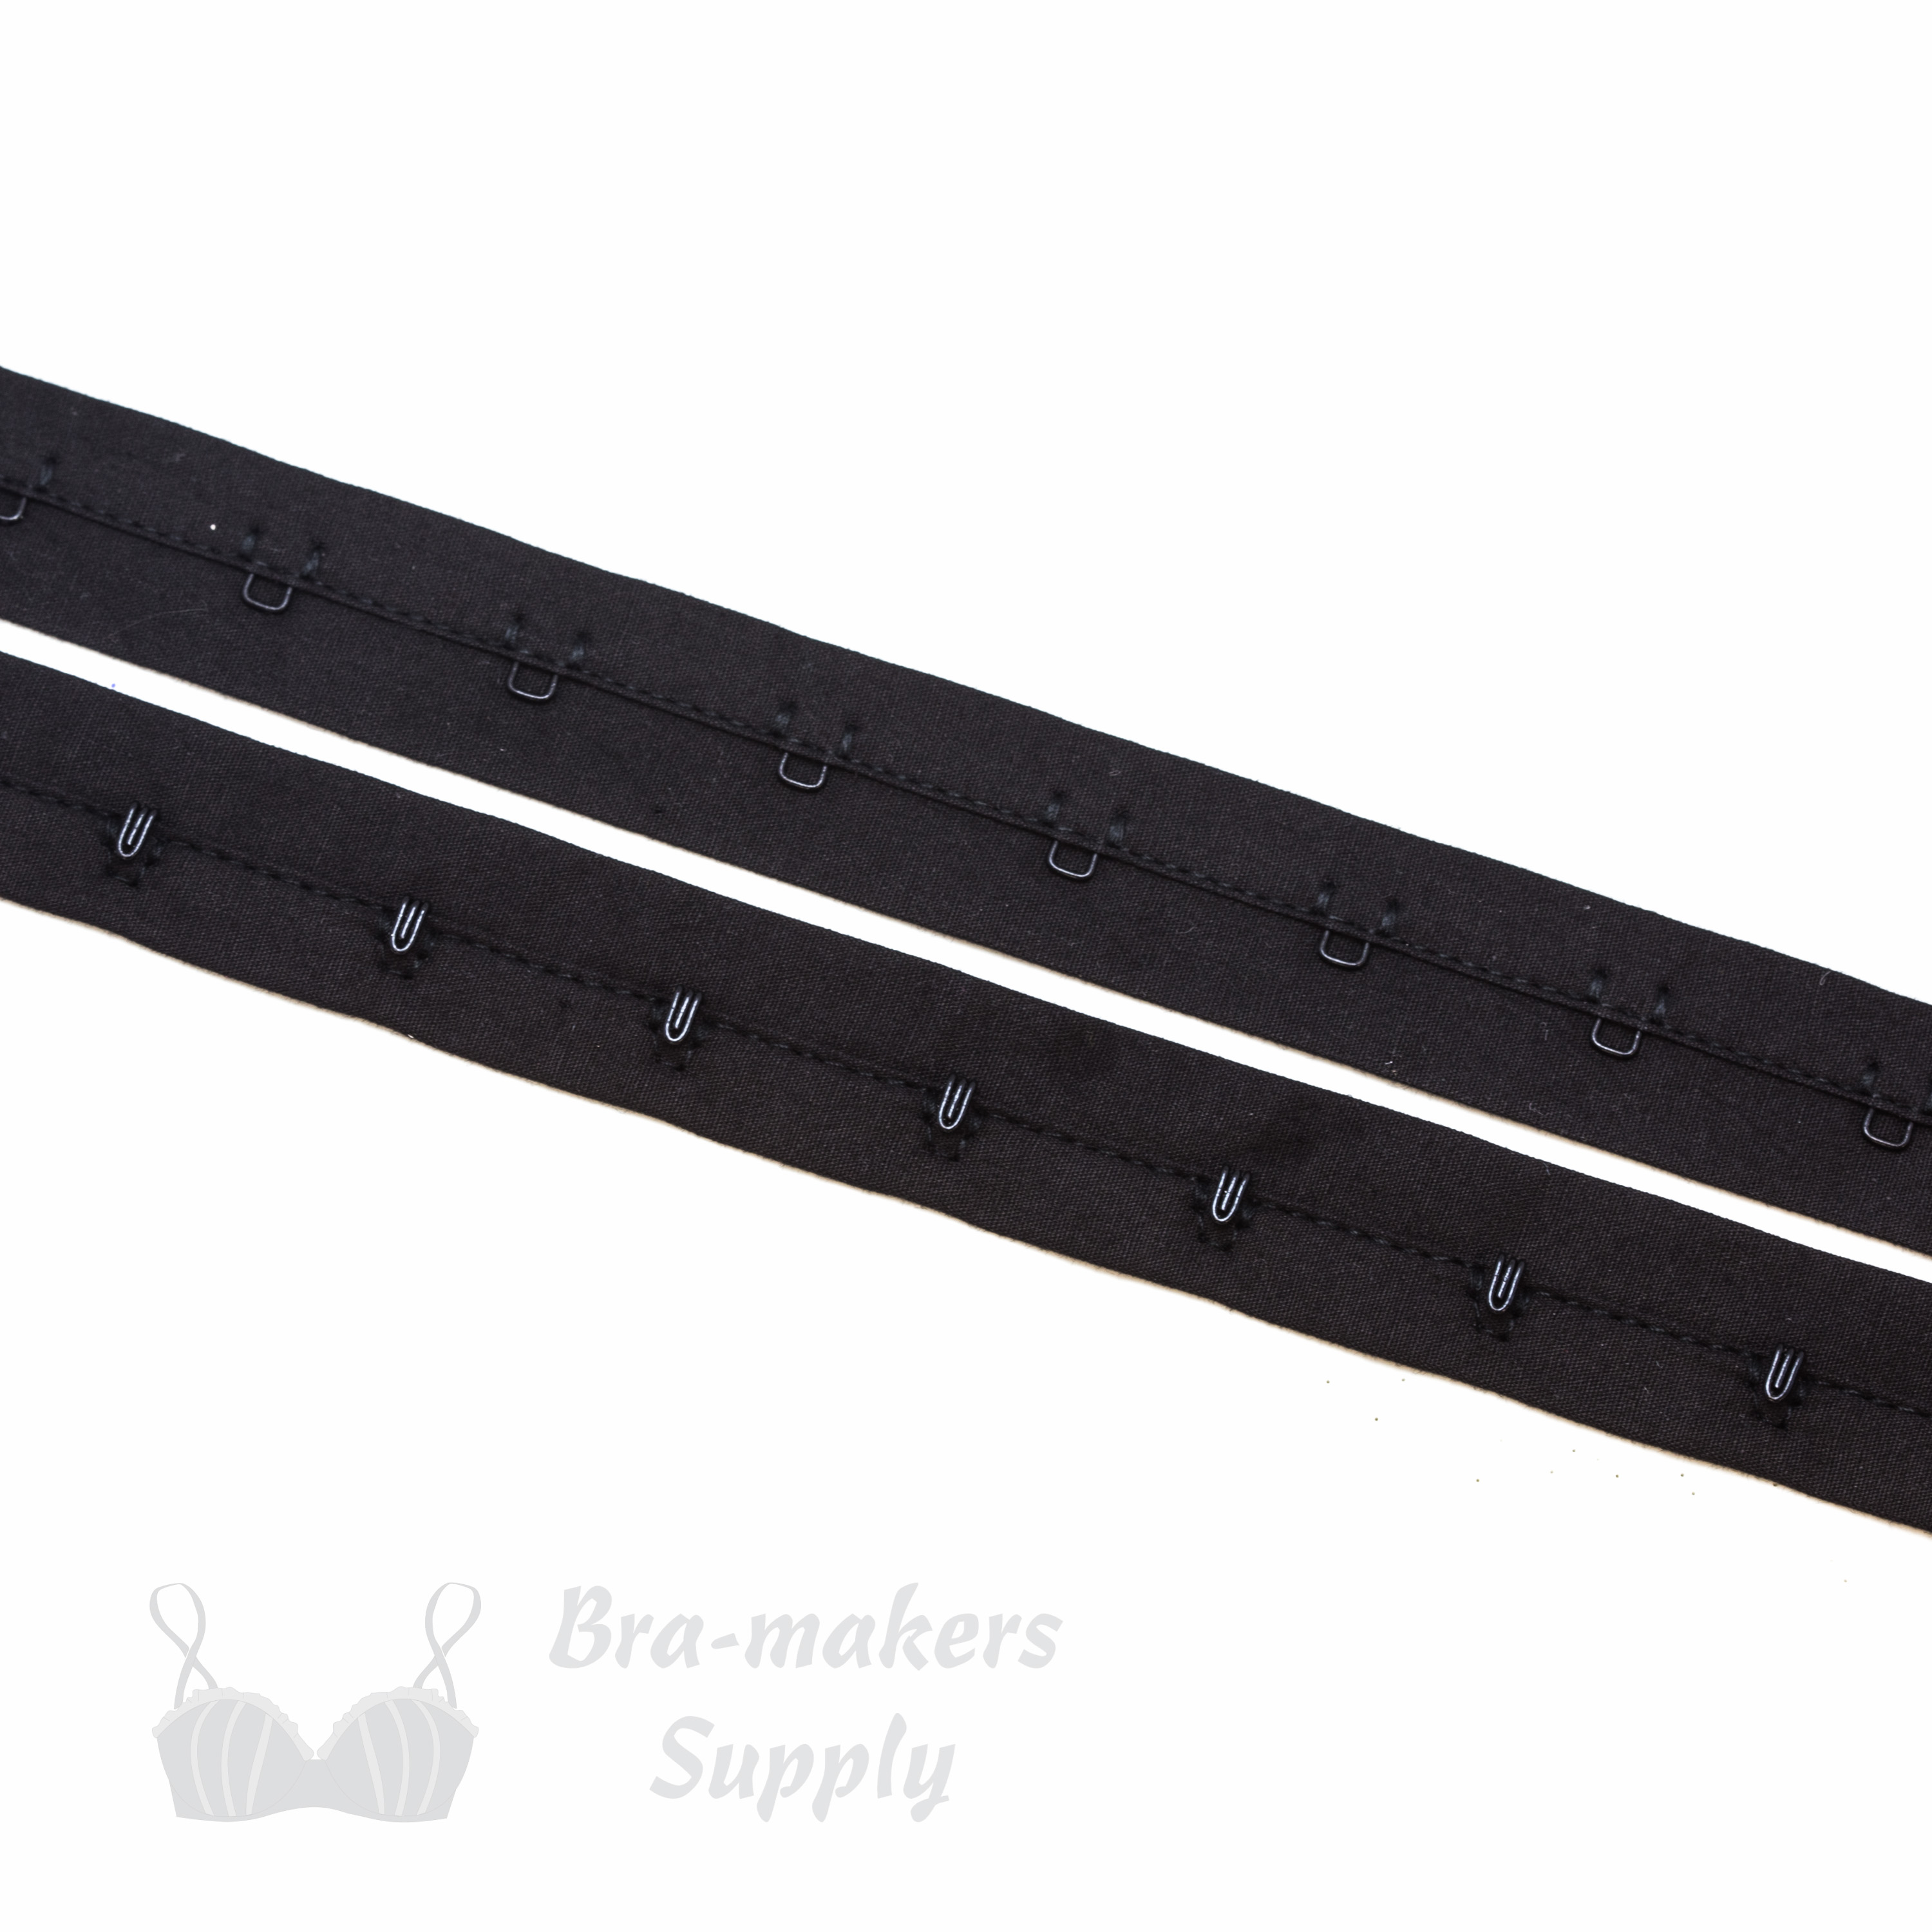 https://www.braandcorsetsupplies.com/wp-content/uploads/2016/10/single-row-cotton-hook-and-eye-tape-HC-40-black-from-Bra-Makers-Supply-front-separated-shown.jpg